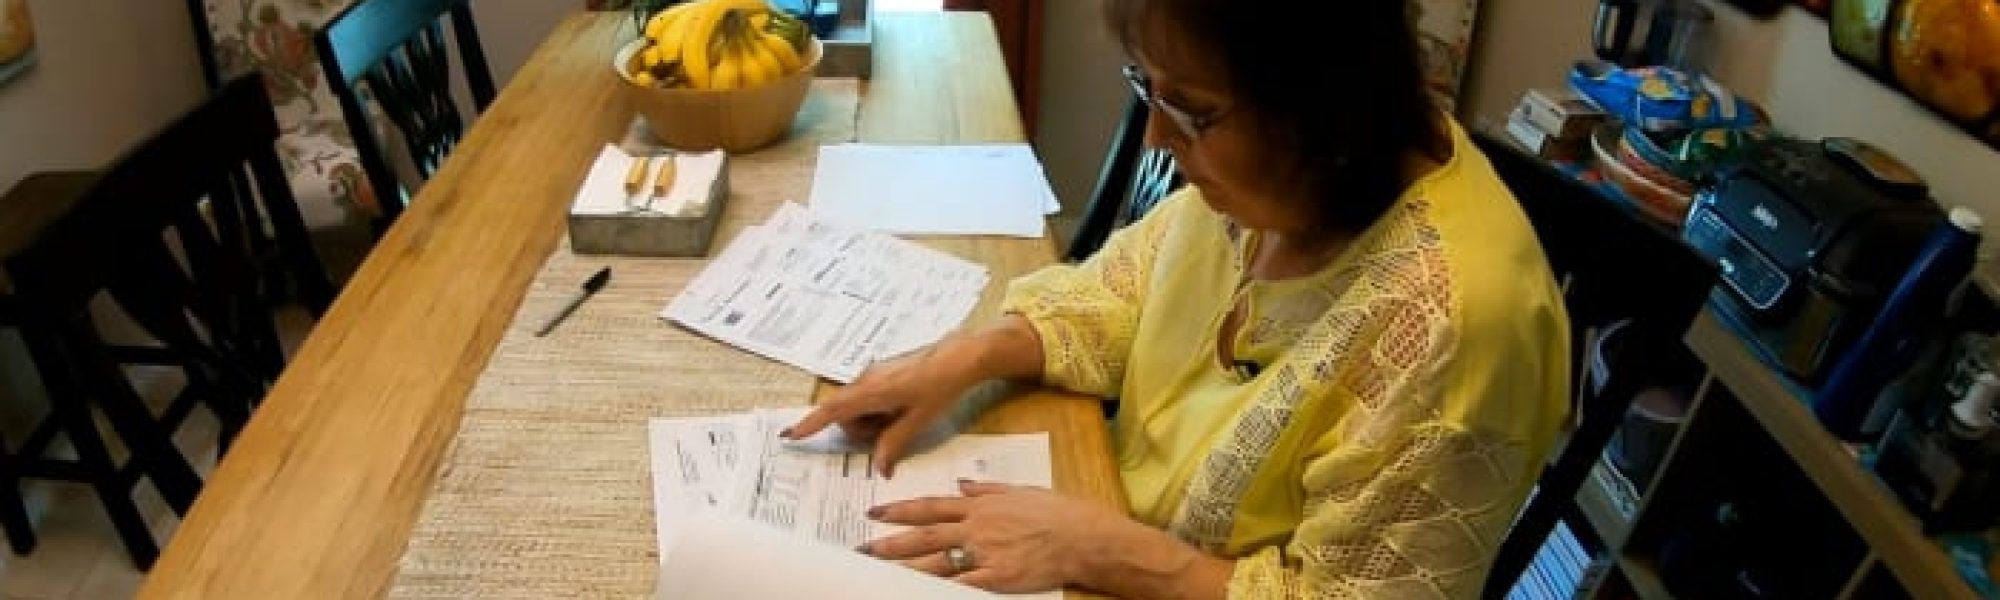 KPRC 2 Investigates: Woman shocked by $4,000 electricity bill